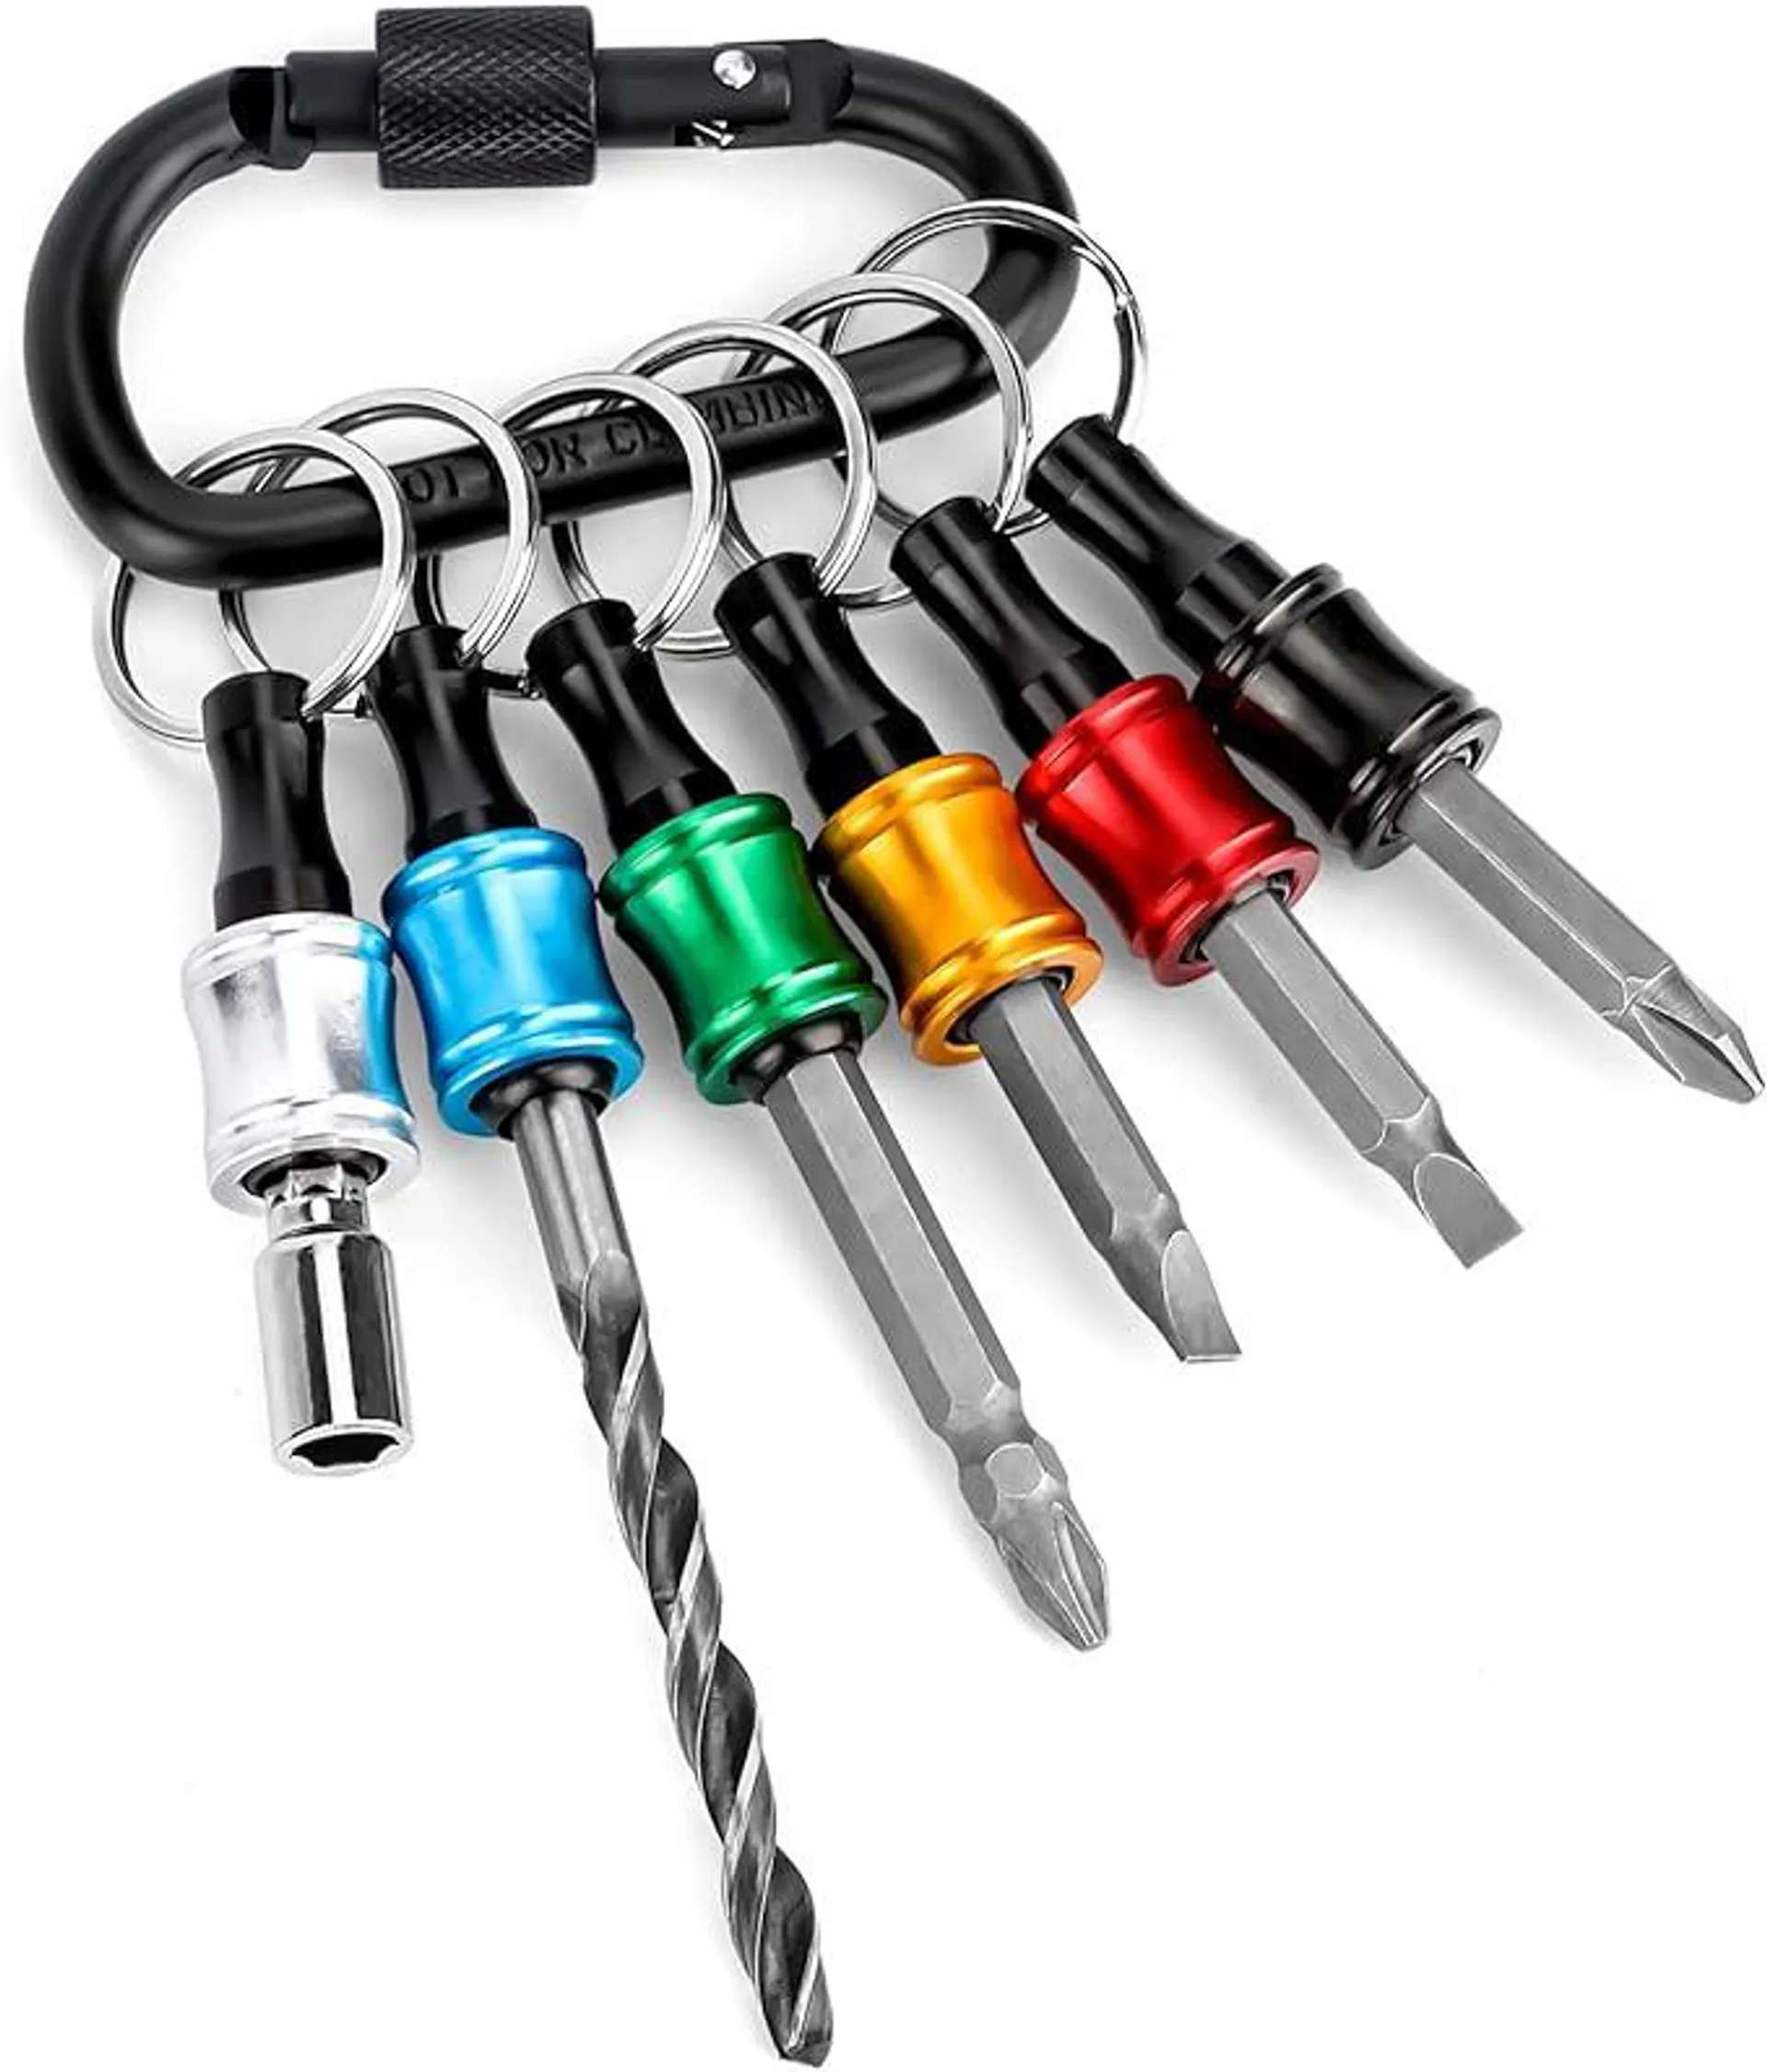 1/4 Inch Hex Shank Drill Bits Holder - Portable Six Color Coded Quick-Change Screwdriver Bits Holder Organizer Tool for 1/4" Impact Tips, Screws, Drivers, with Black Carabiner(Bits Not Include)